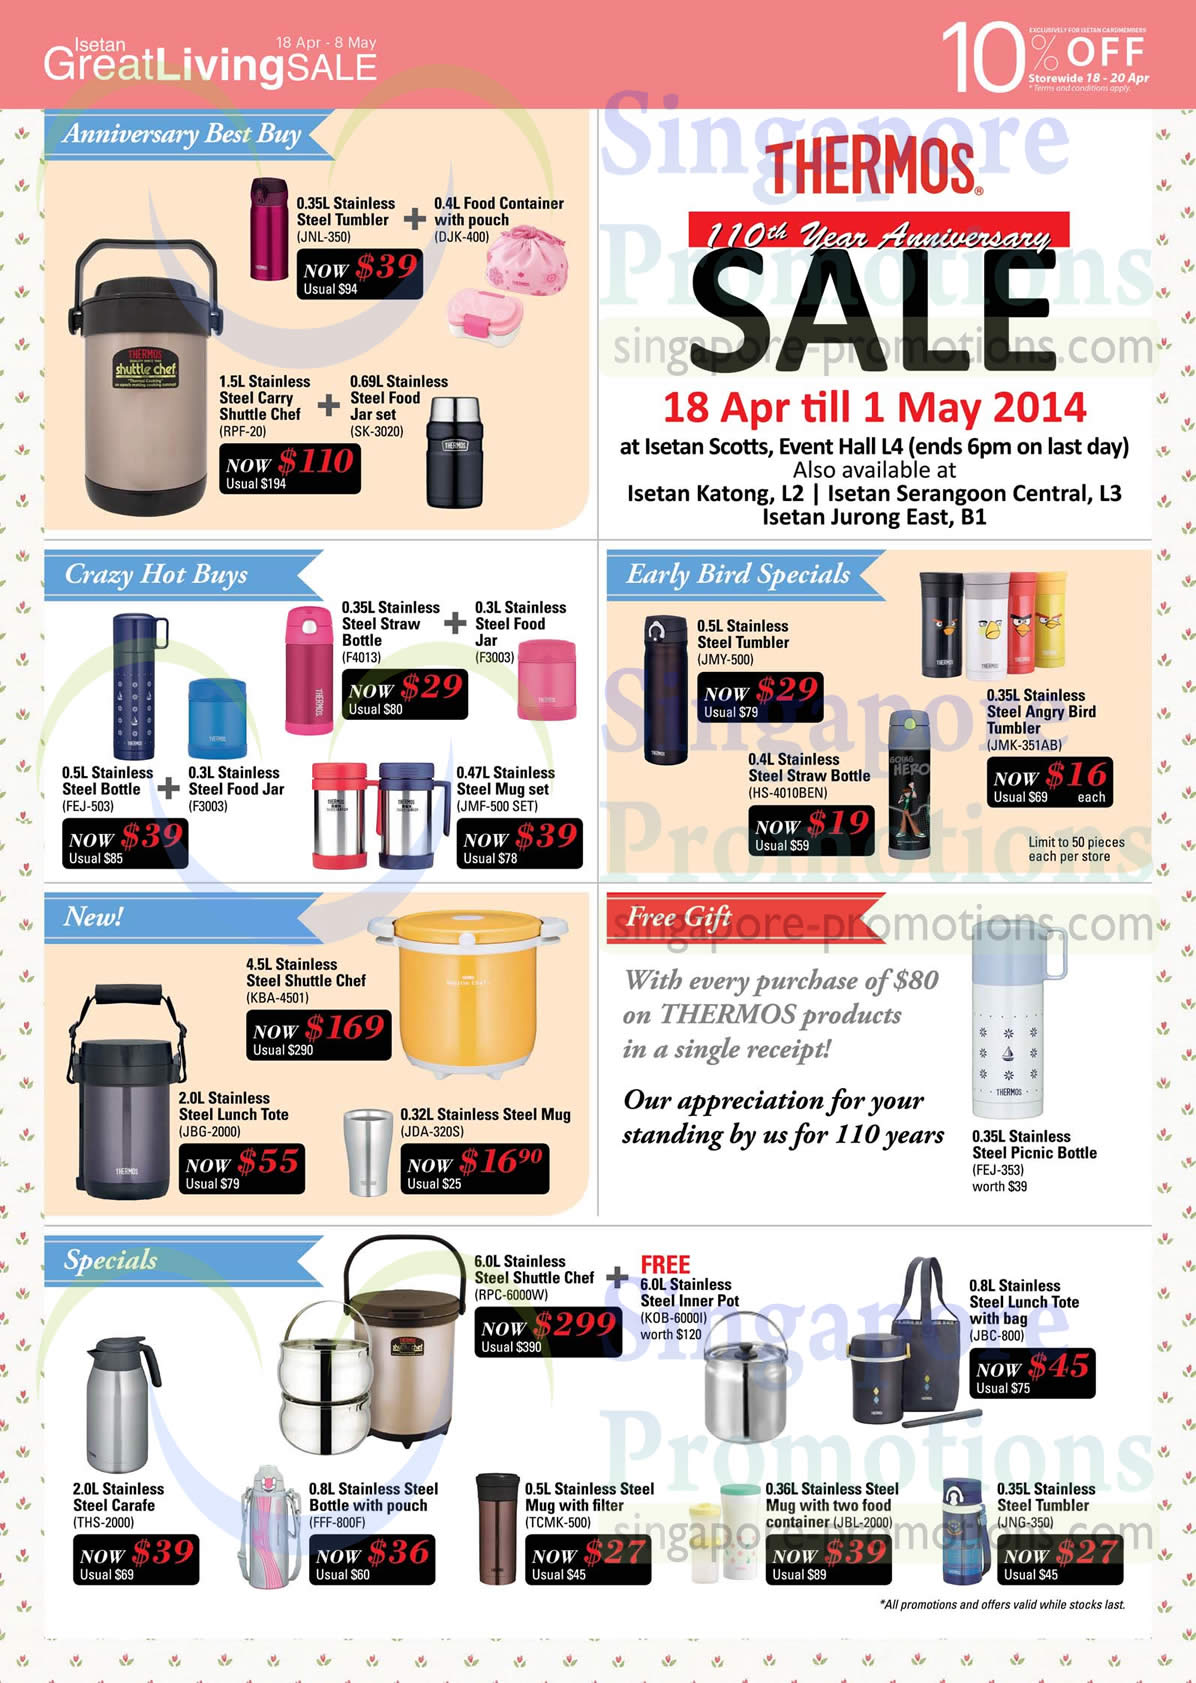 Featured image for Isetan Great Living SALE Thermos, WMF & More Offers 18 Apr - 8 May 2014